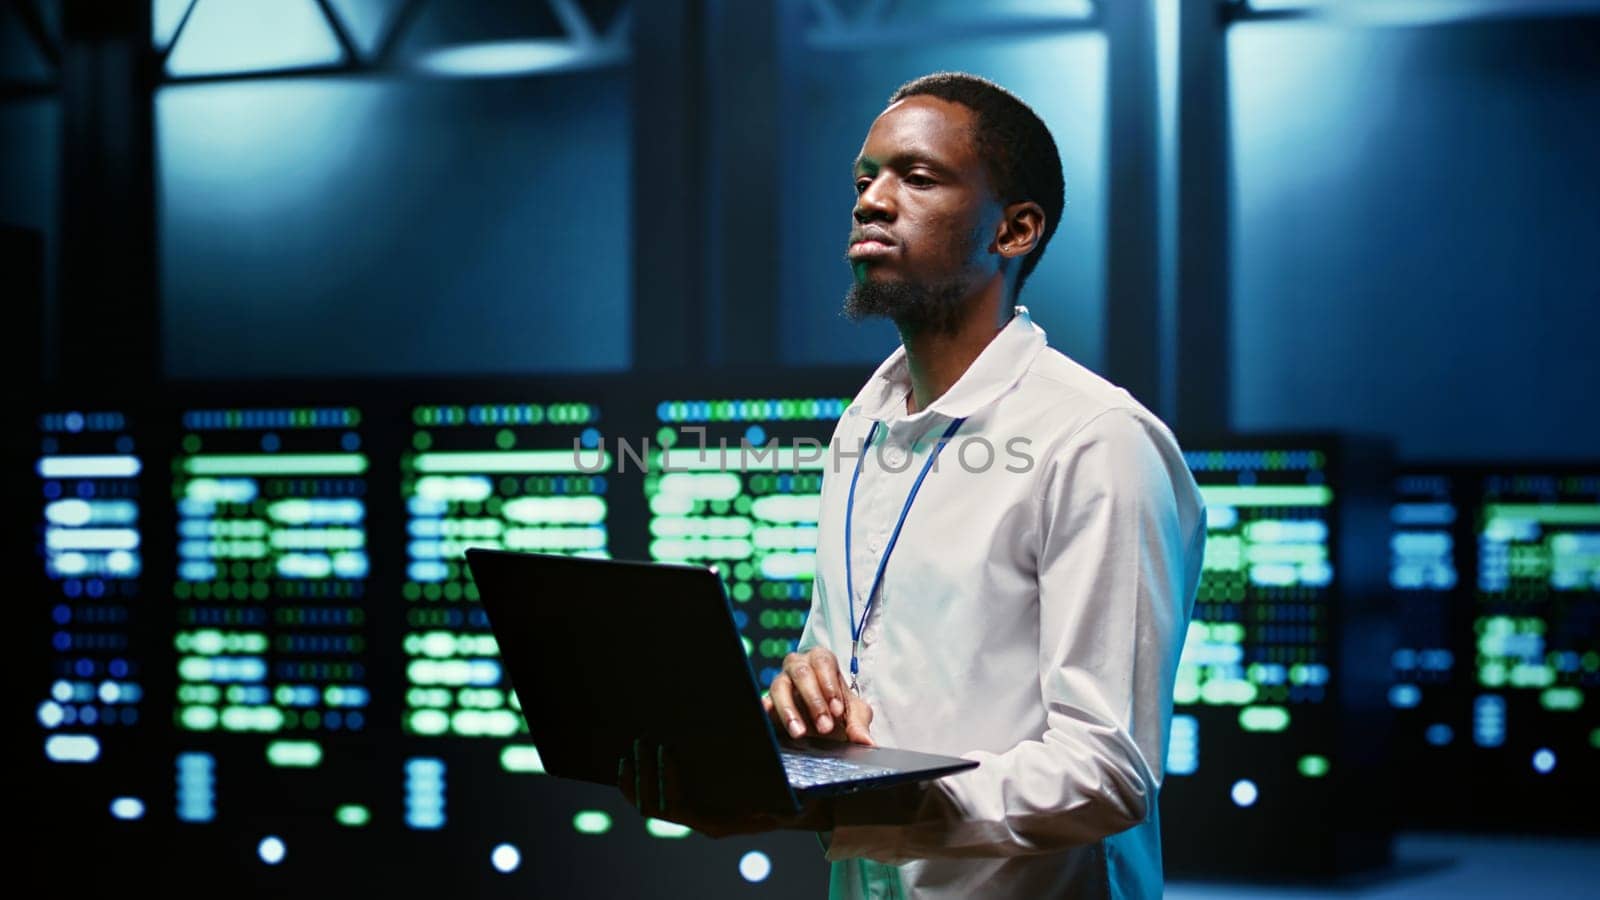 African american specialist in high tech establishment mending network problems affecting server clusters performance and connectivity, leading to slow data transfer rates